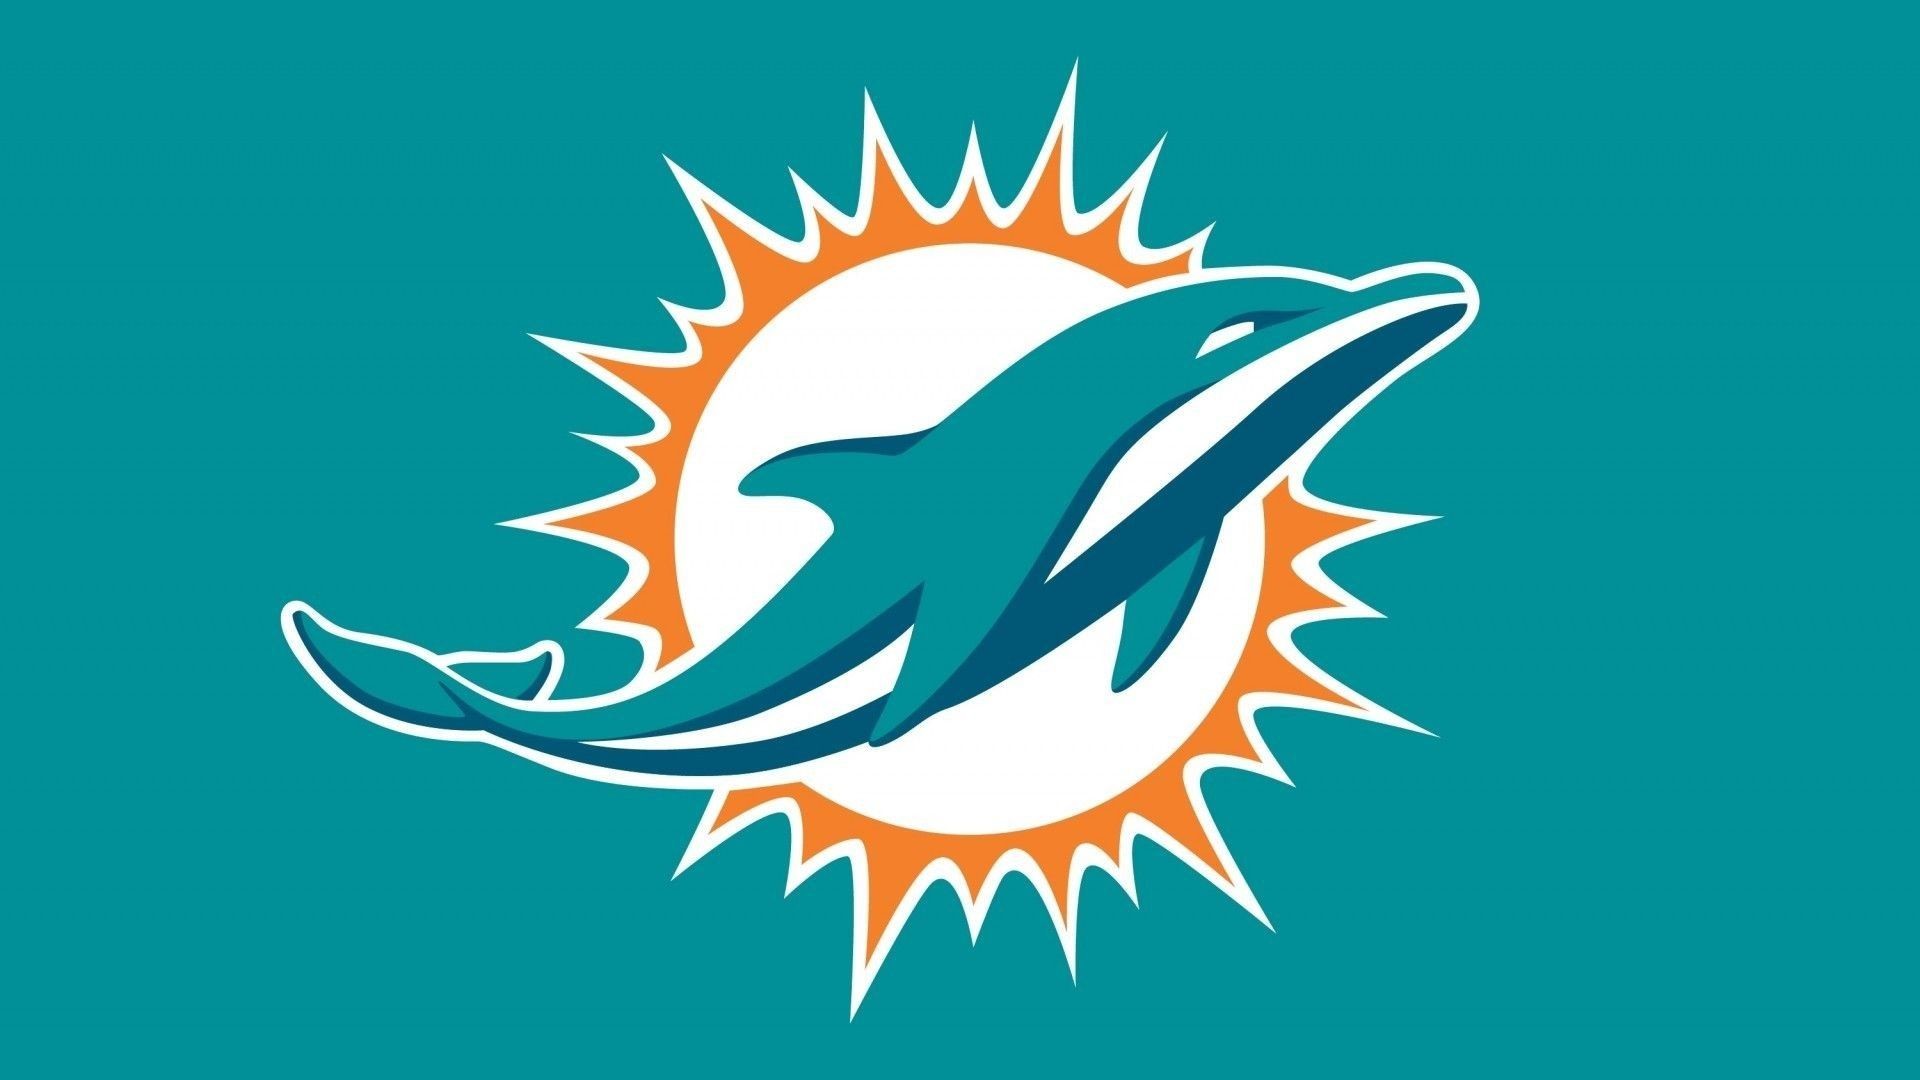 1920x1080 Miami Dolphins Wallpaper HD | Best NFL Wallpapers